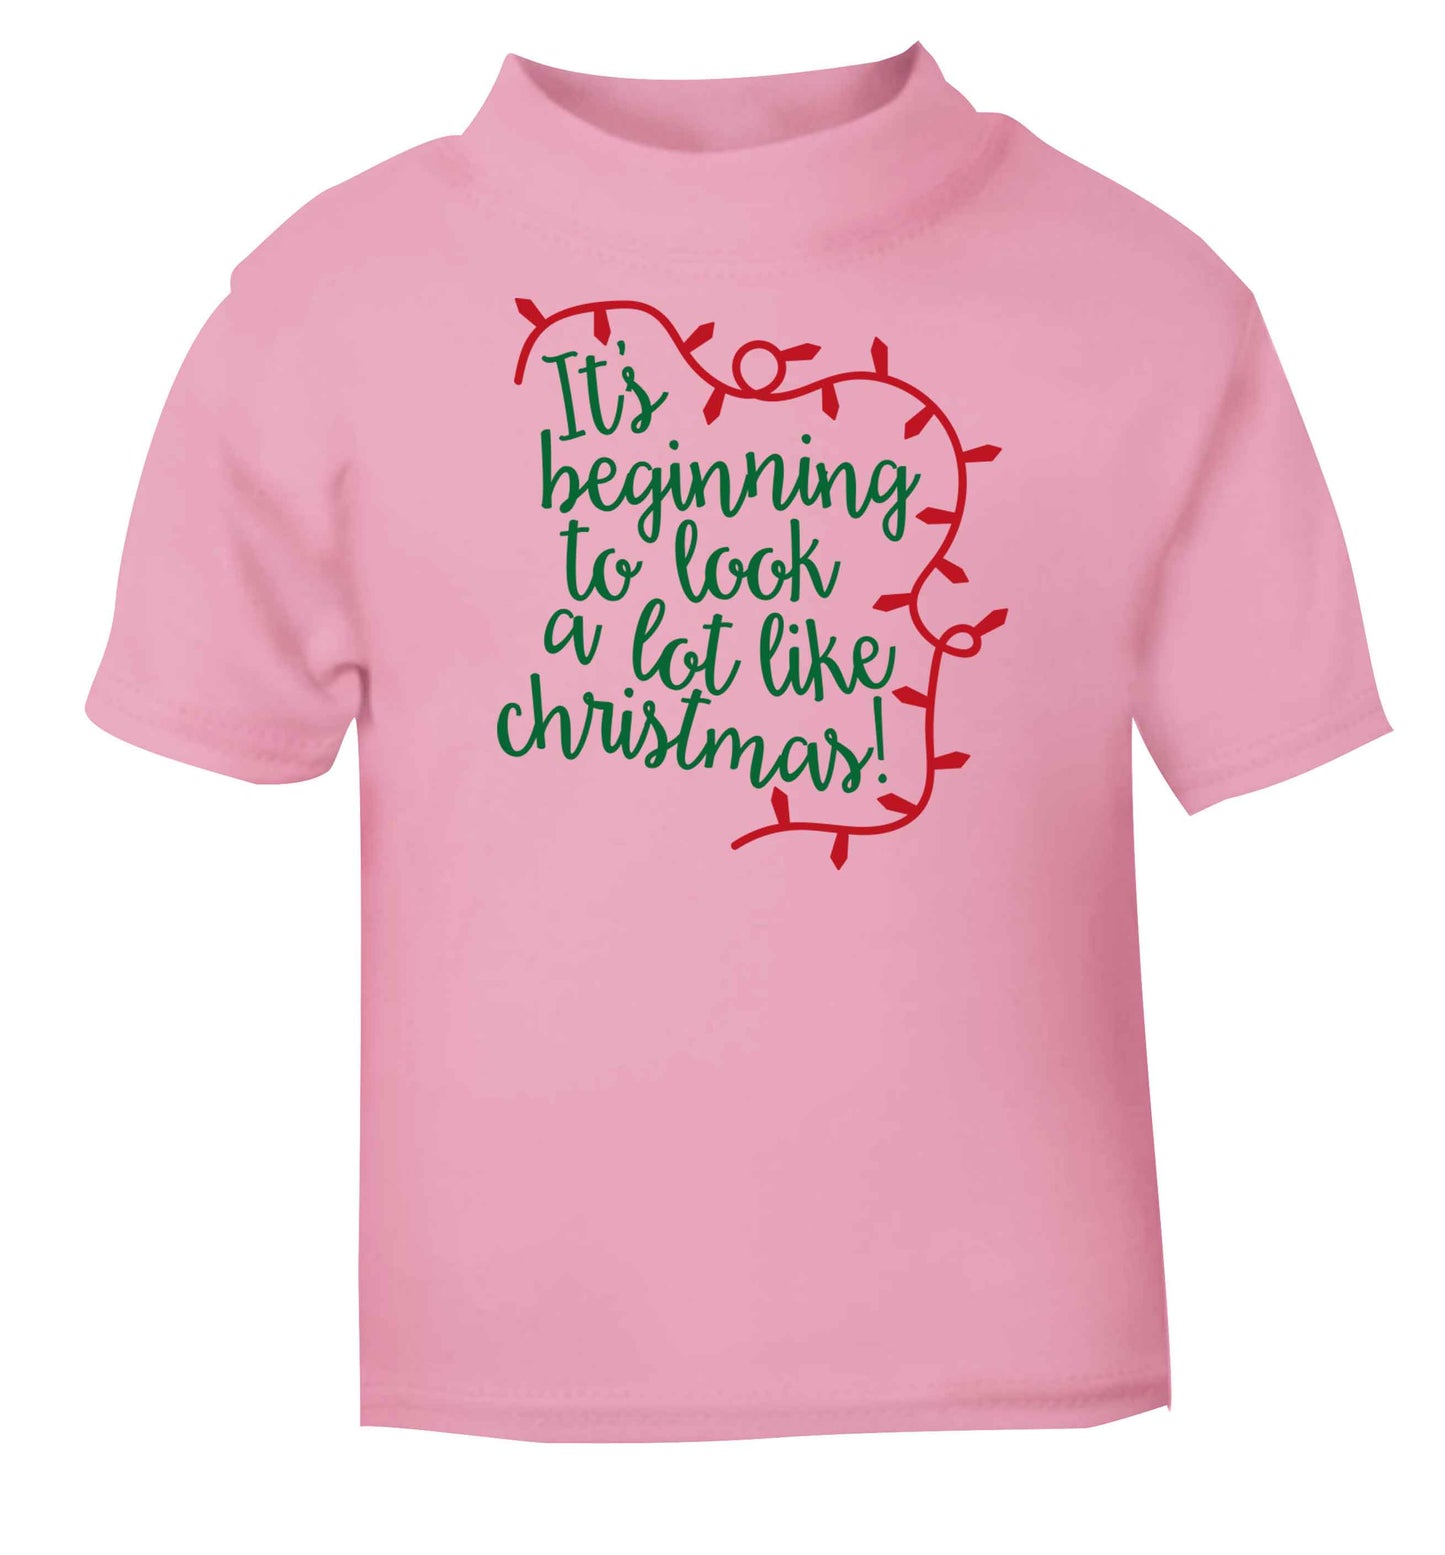 It's beginning to look a lot like Christmas light pink baby toddler Tshirt 2 Years